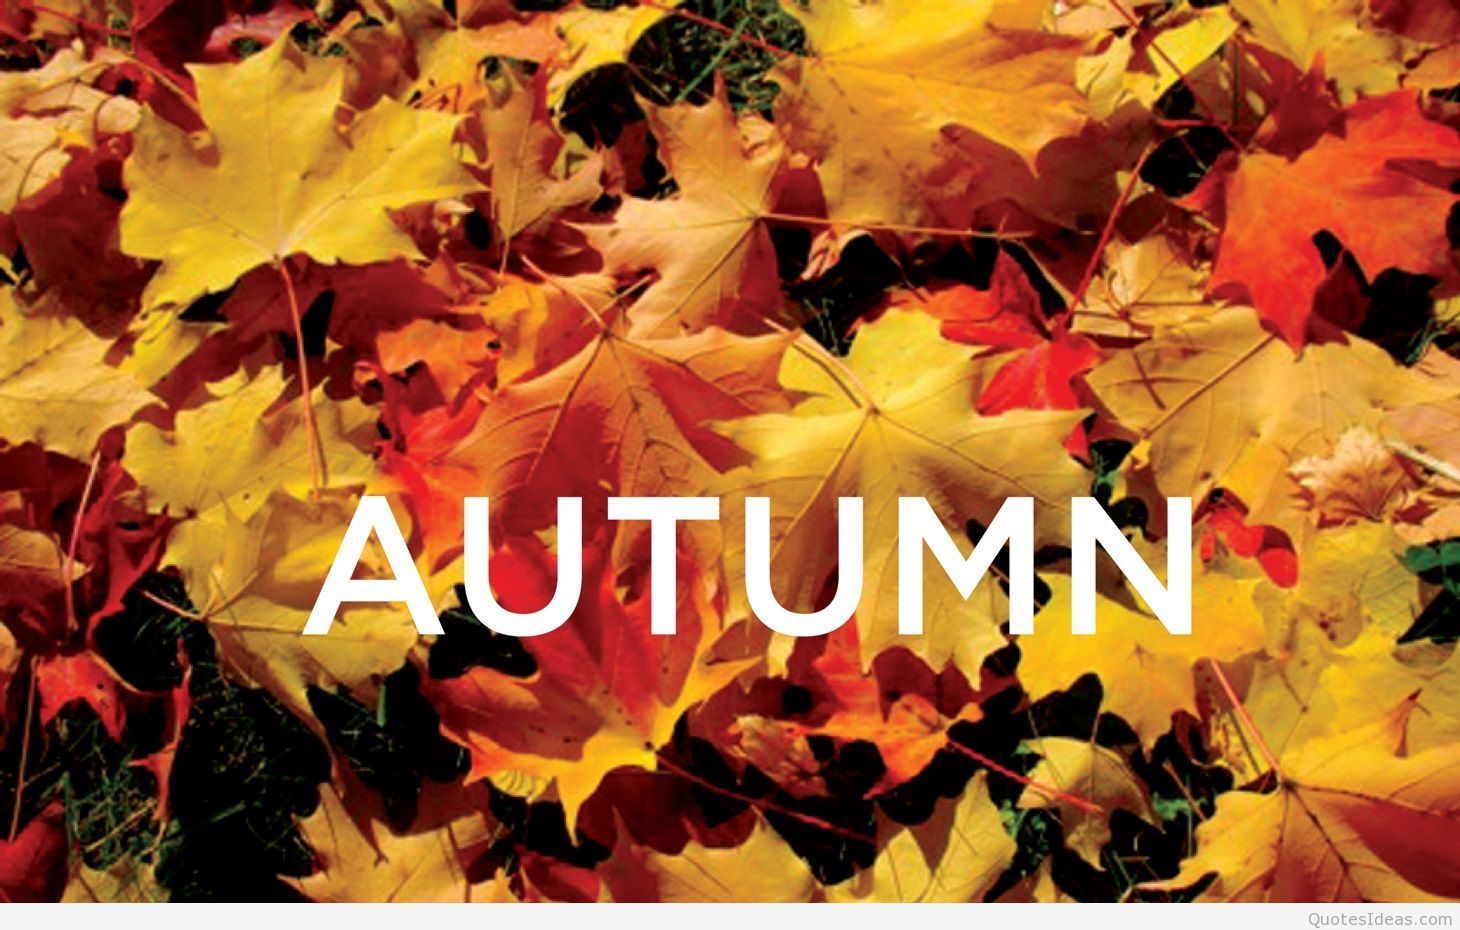 Autumn wallpaper quotes HD and autumn sayings messages